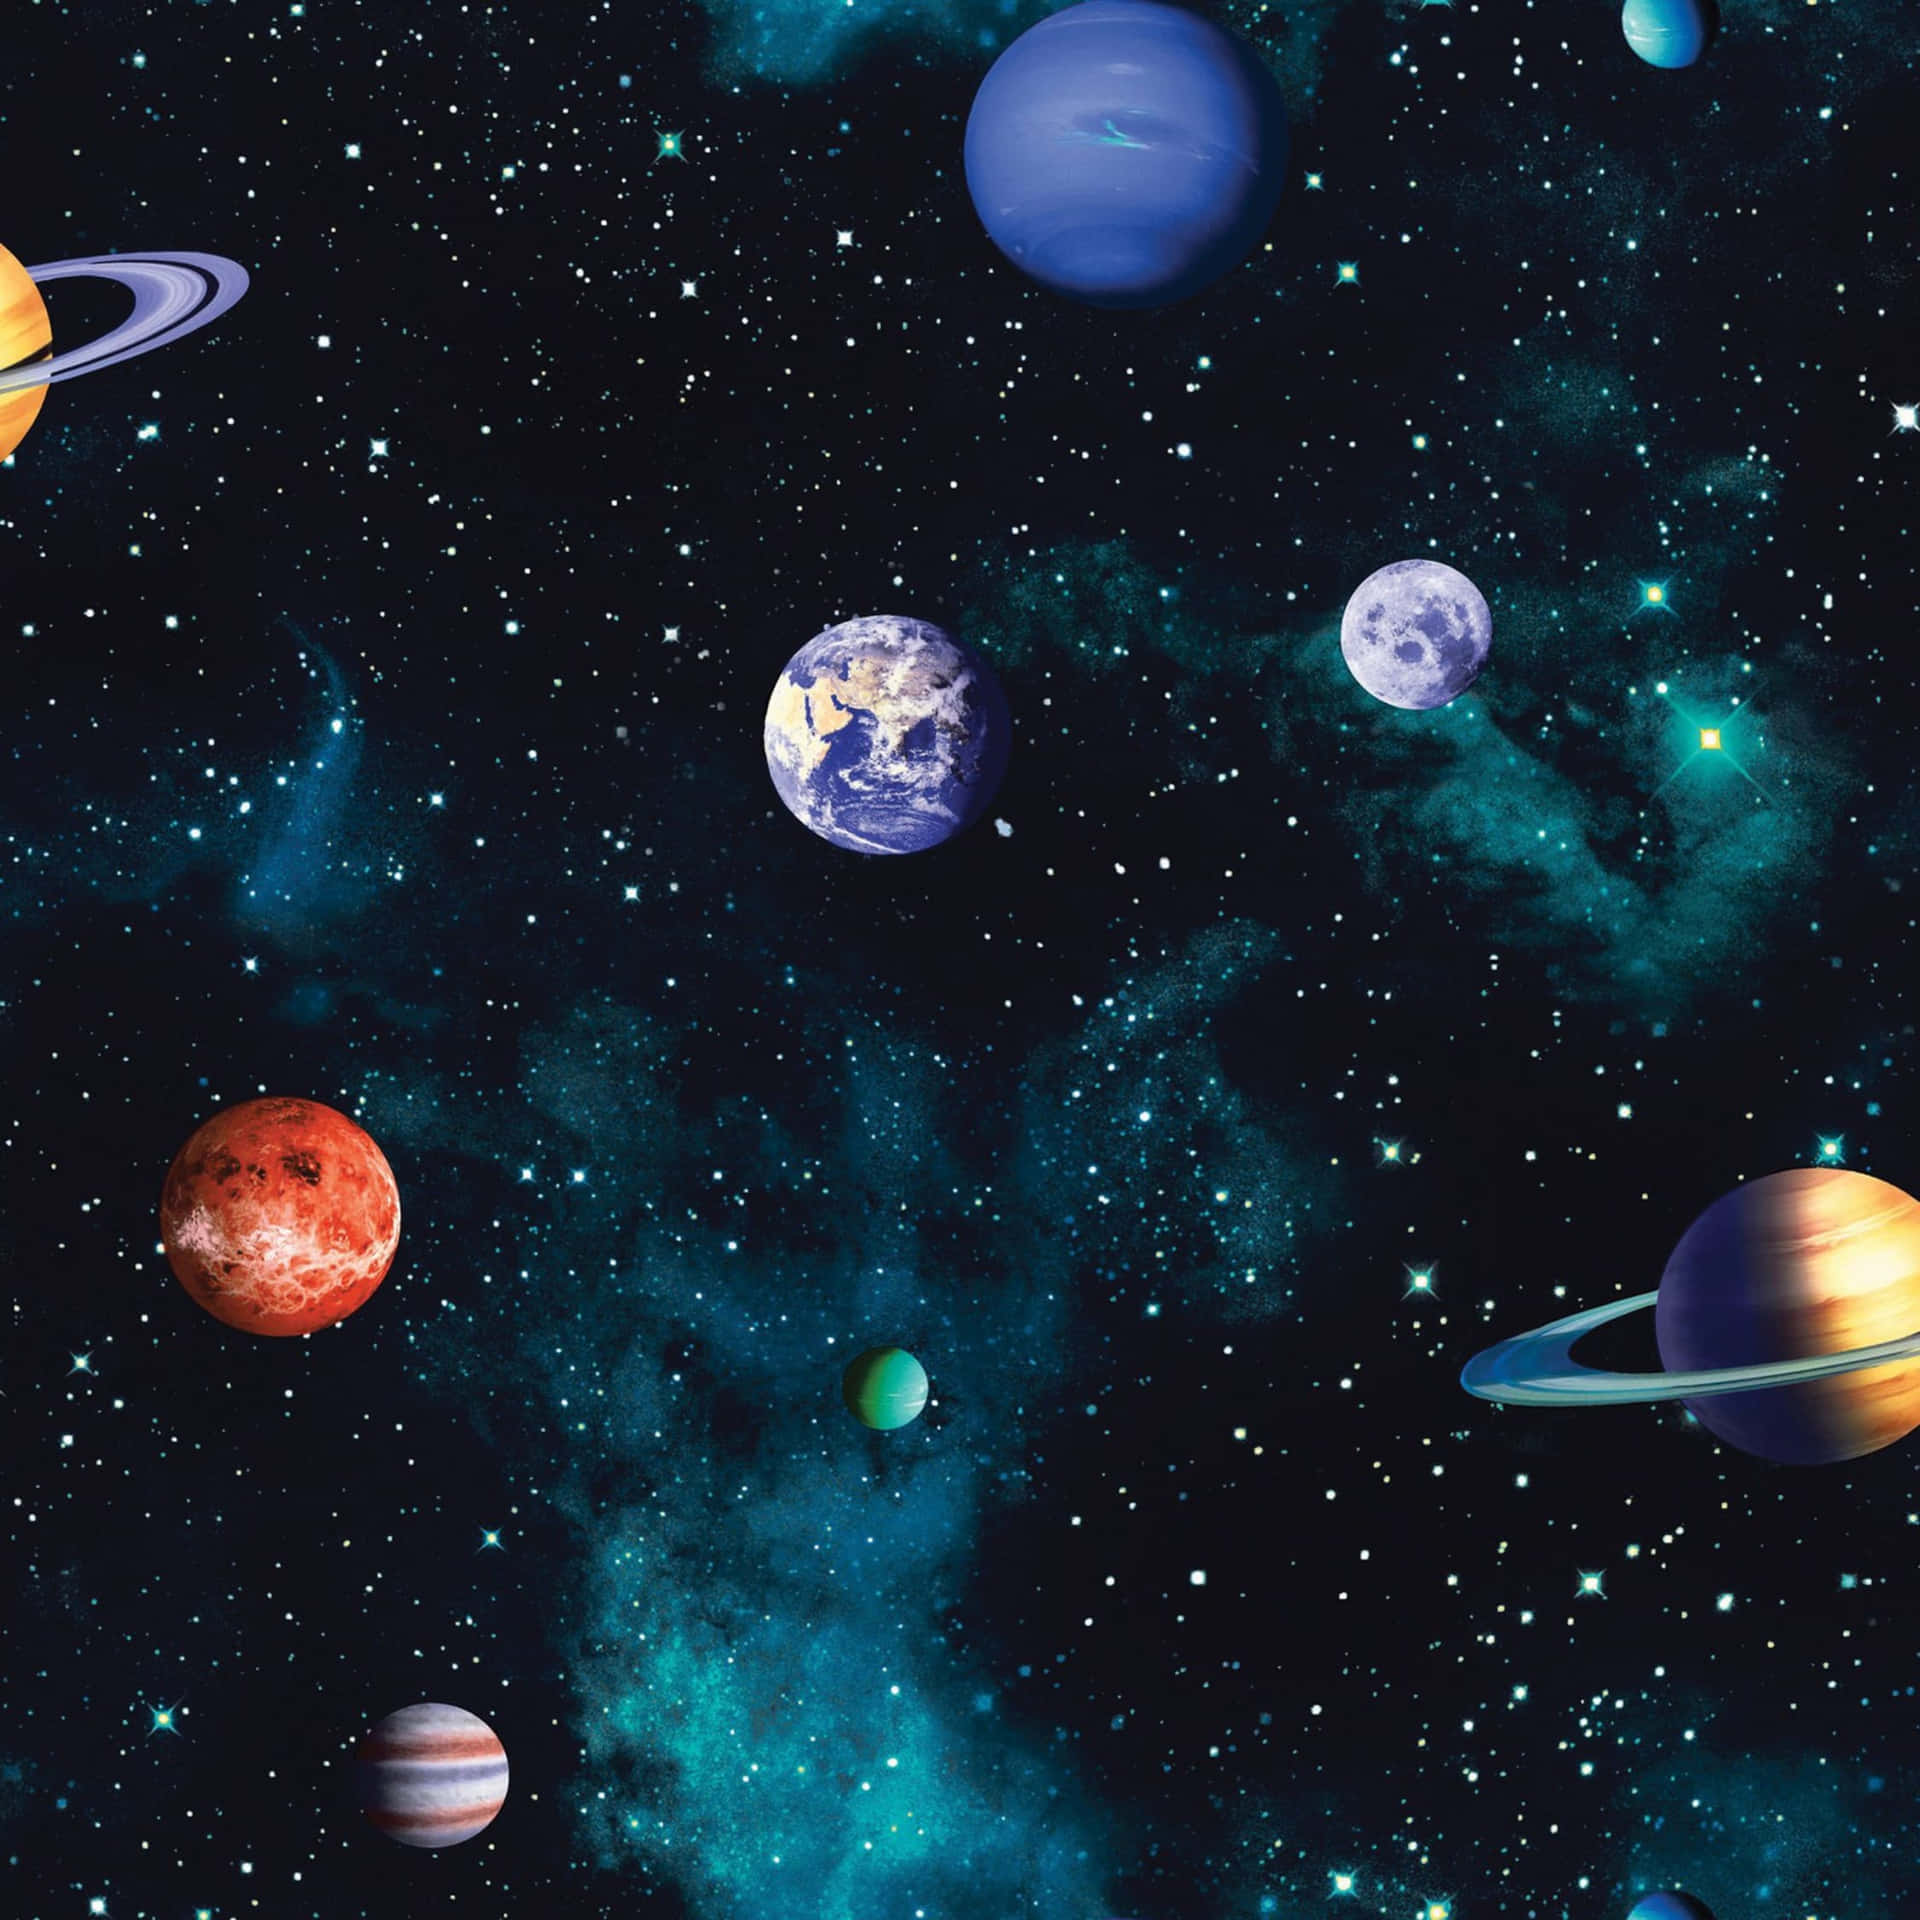 Explore the depths of space with this incredible 3D Space wallpaper Wallpaper